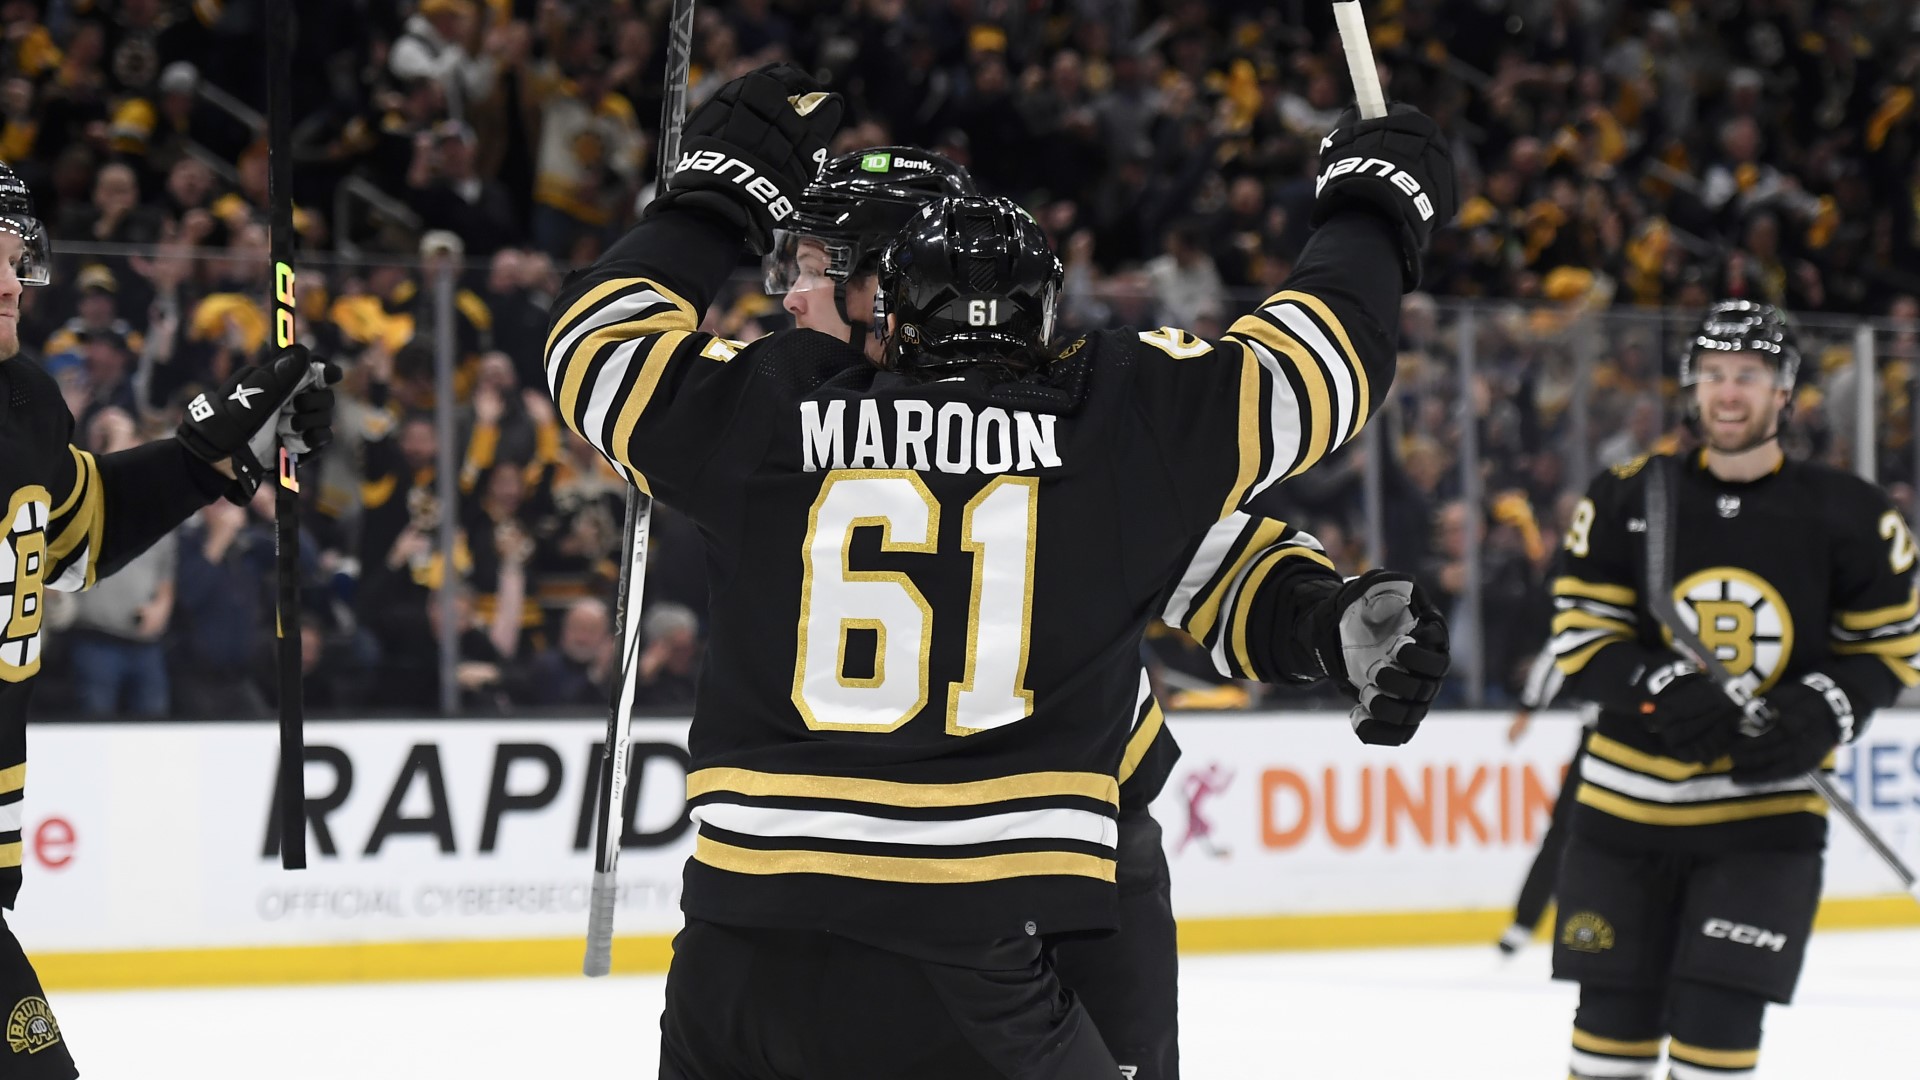 Bruins’ Pat Maroon Jokingly Responds To Game 6 Brad Marchand
Question